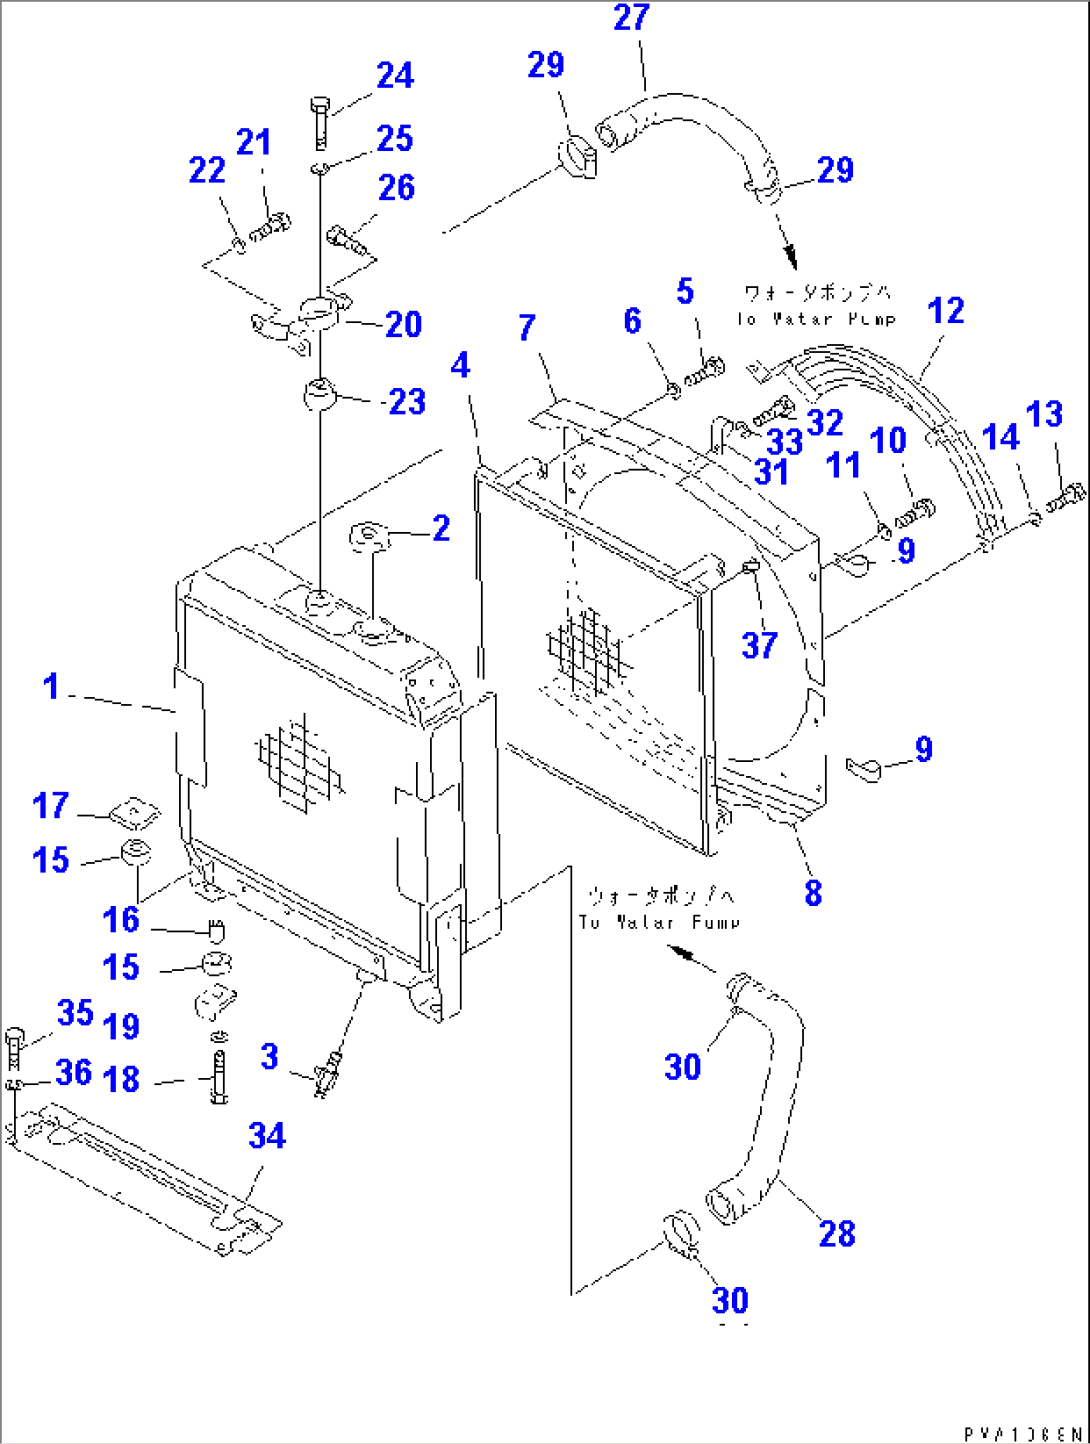 RADIATOR AND PIPING (WITH SANDY DUSTY PROTECTION GRID)(#41001-41183)